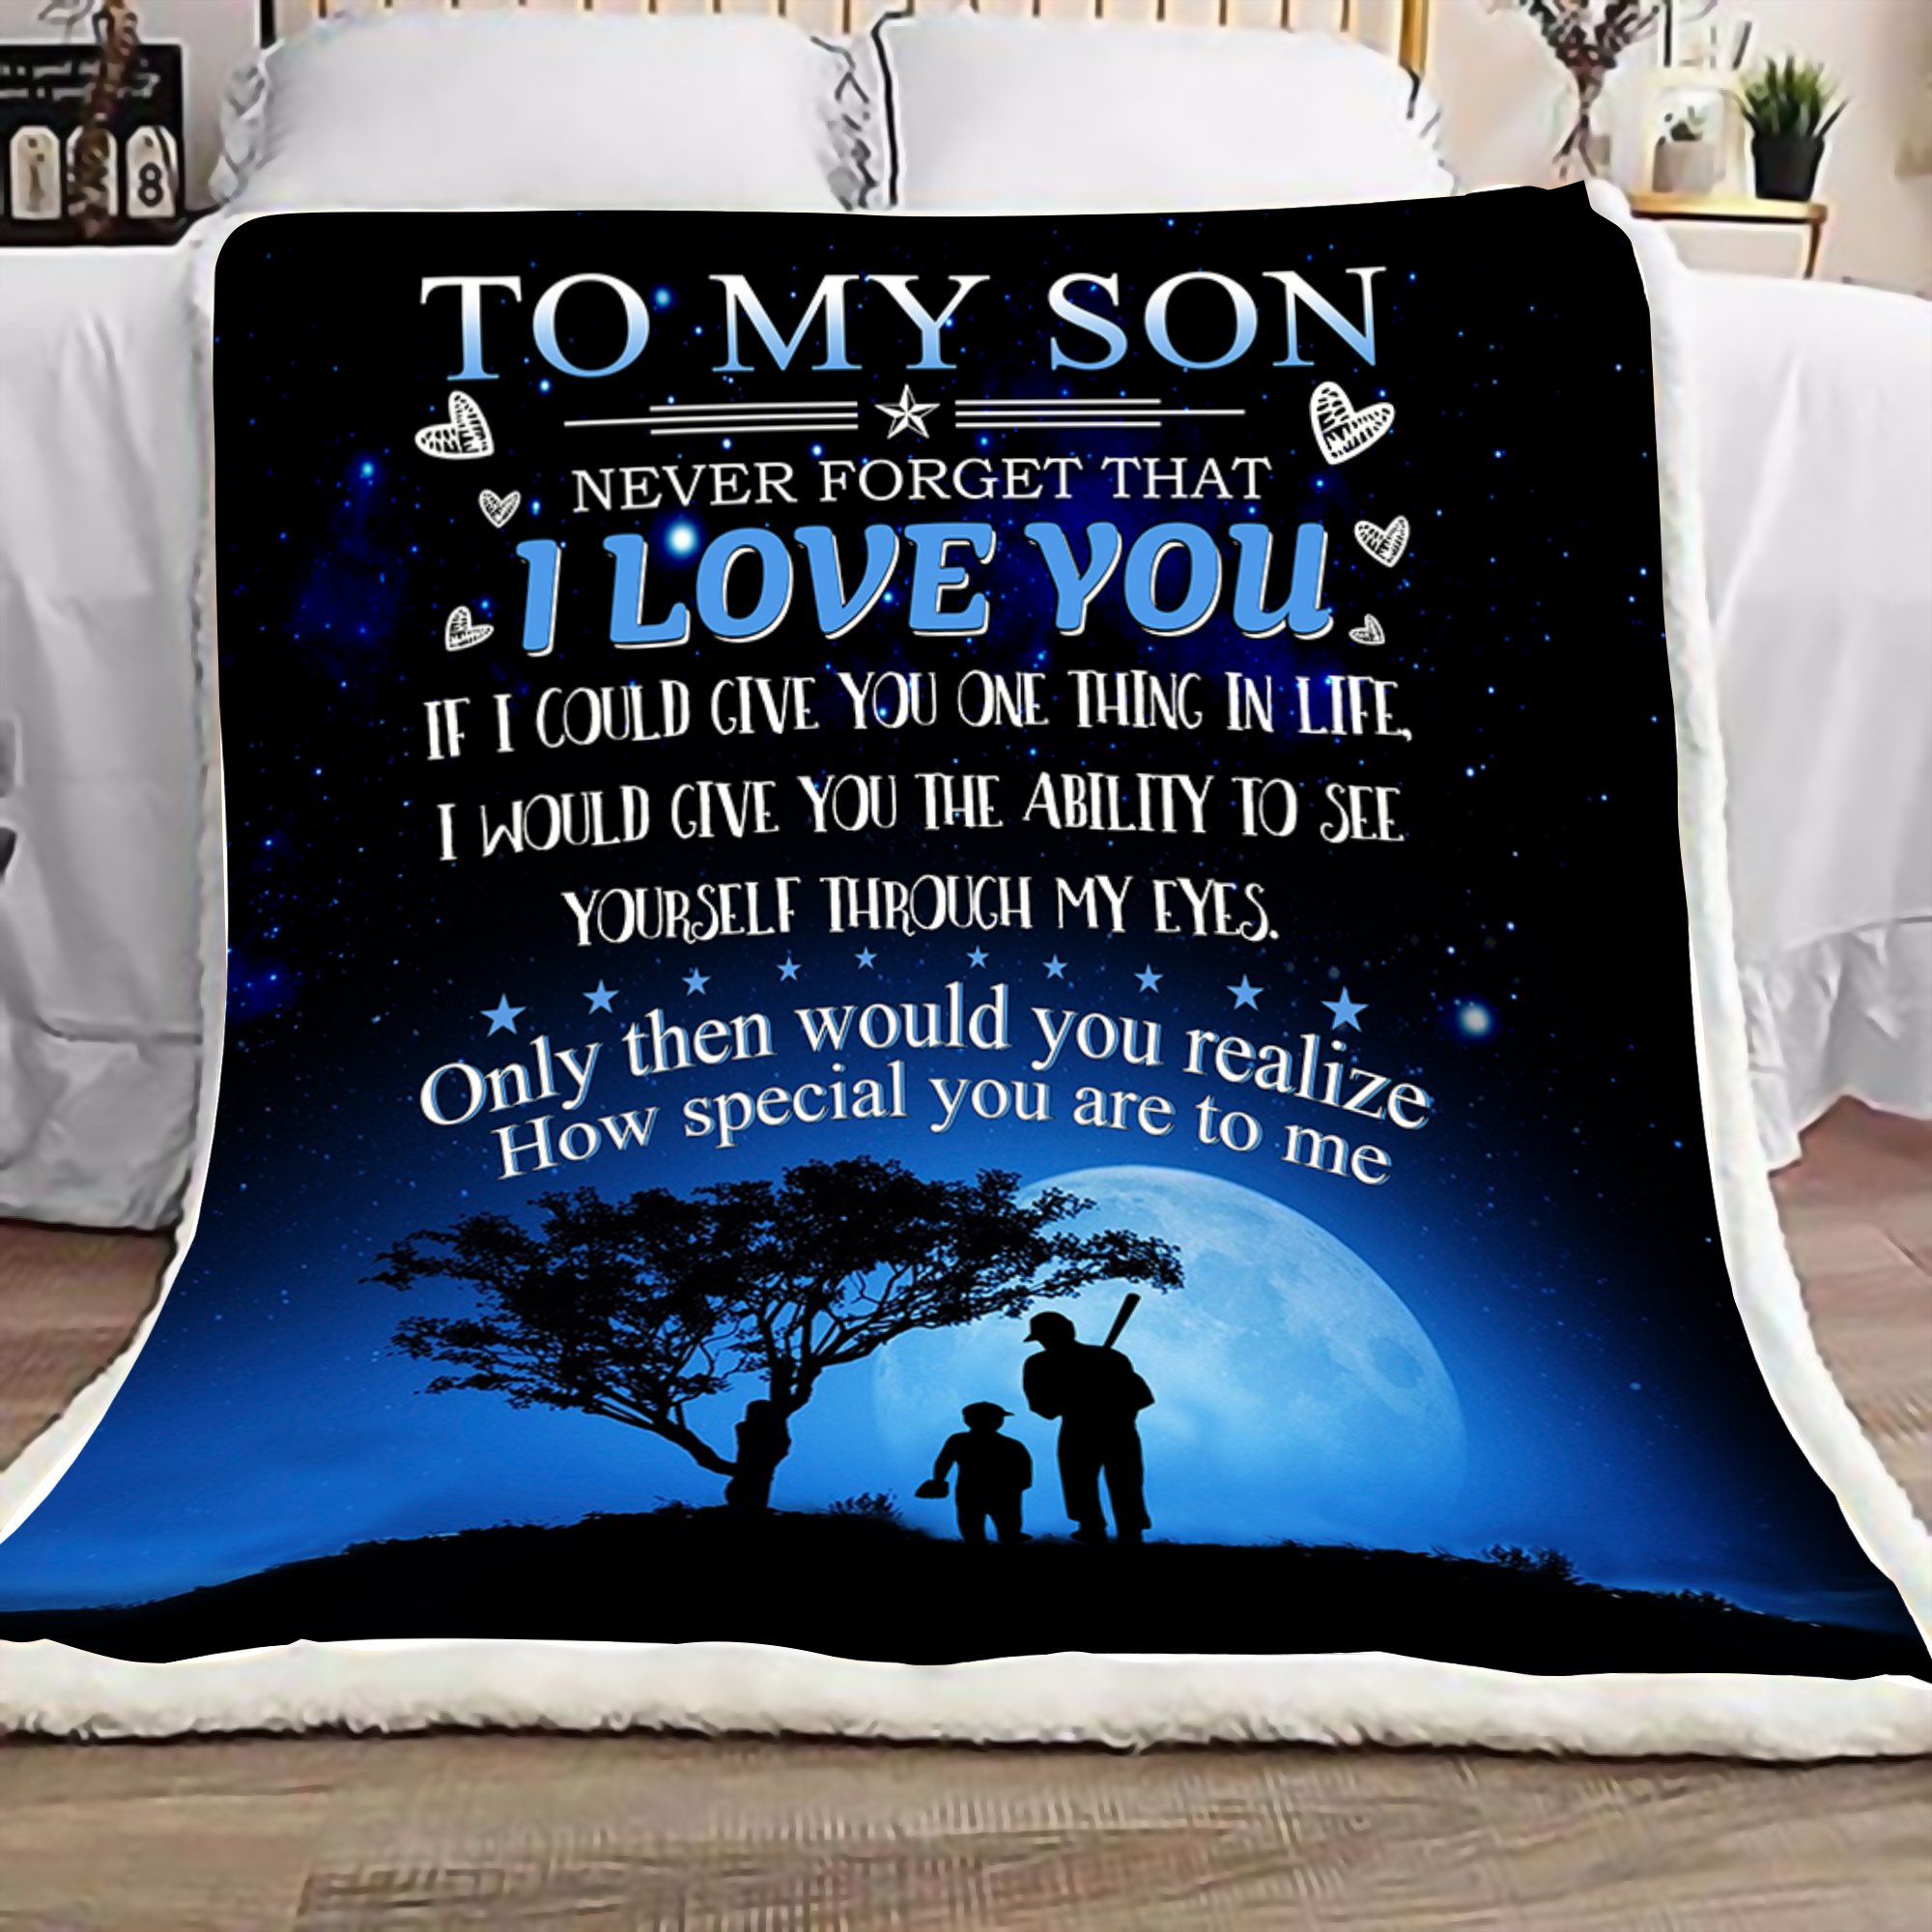 To my son never forget that i love you baseball blanket 3